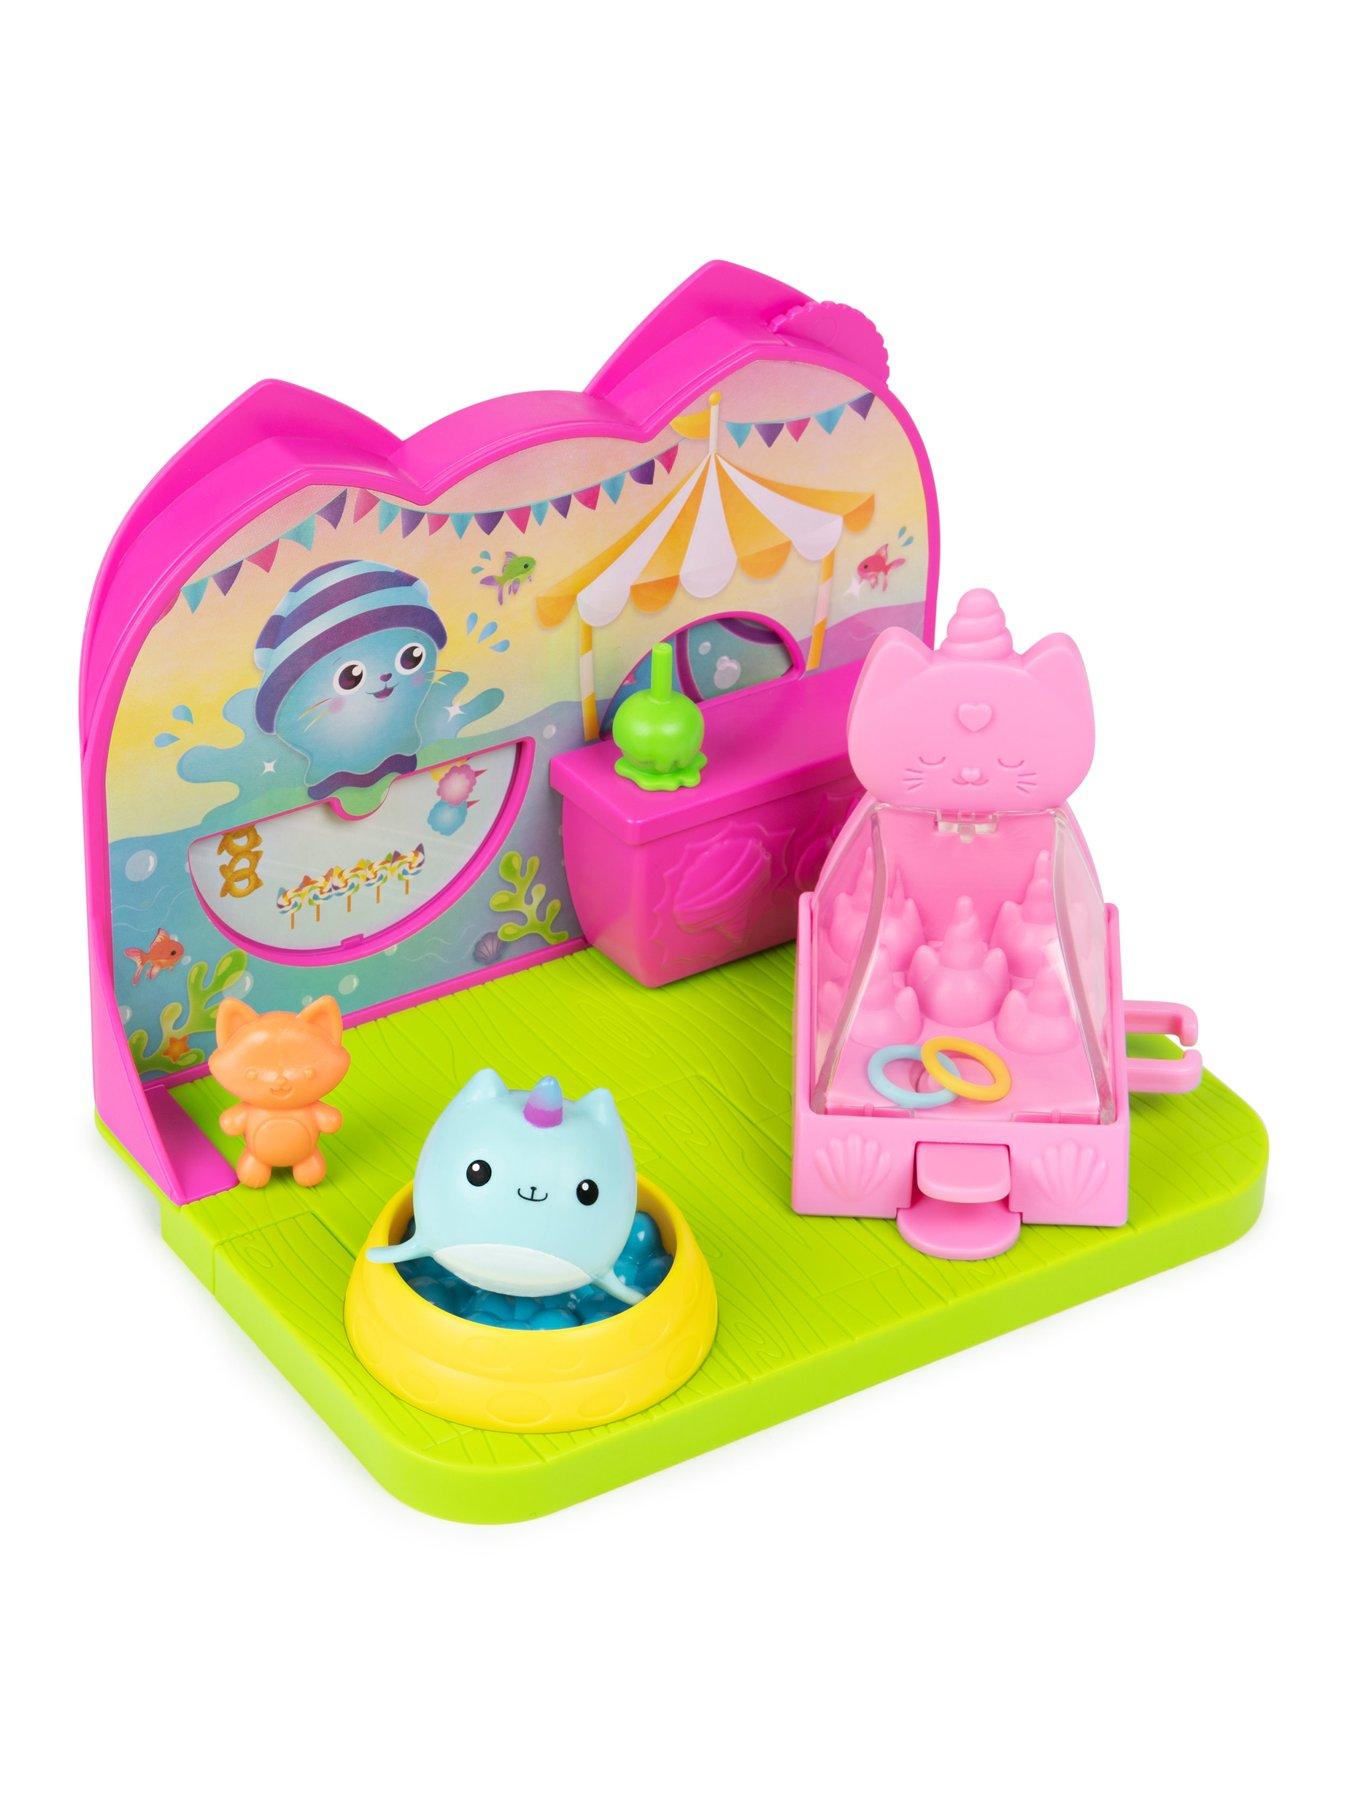 Gabby's Dollhouse Deluxe Figure Gift Set 7 Toy Figures & Surprise  Accessories 778988364840